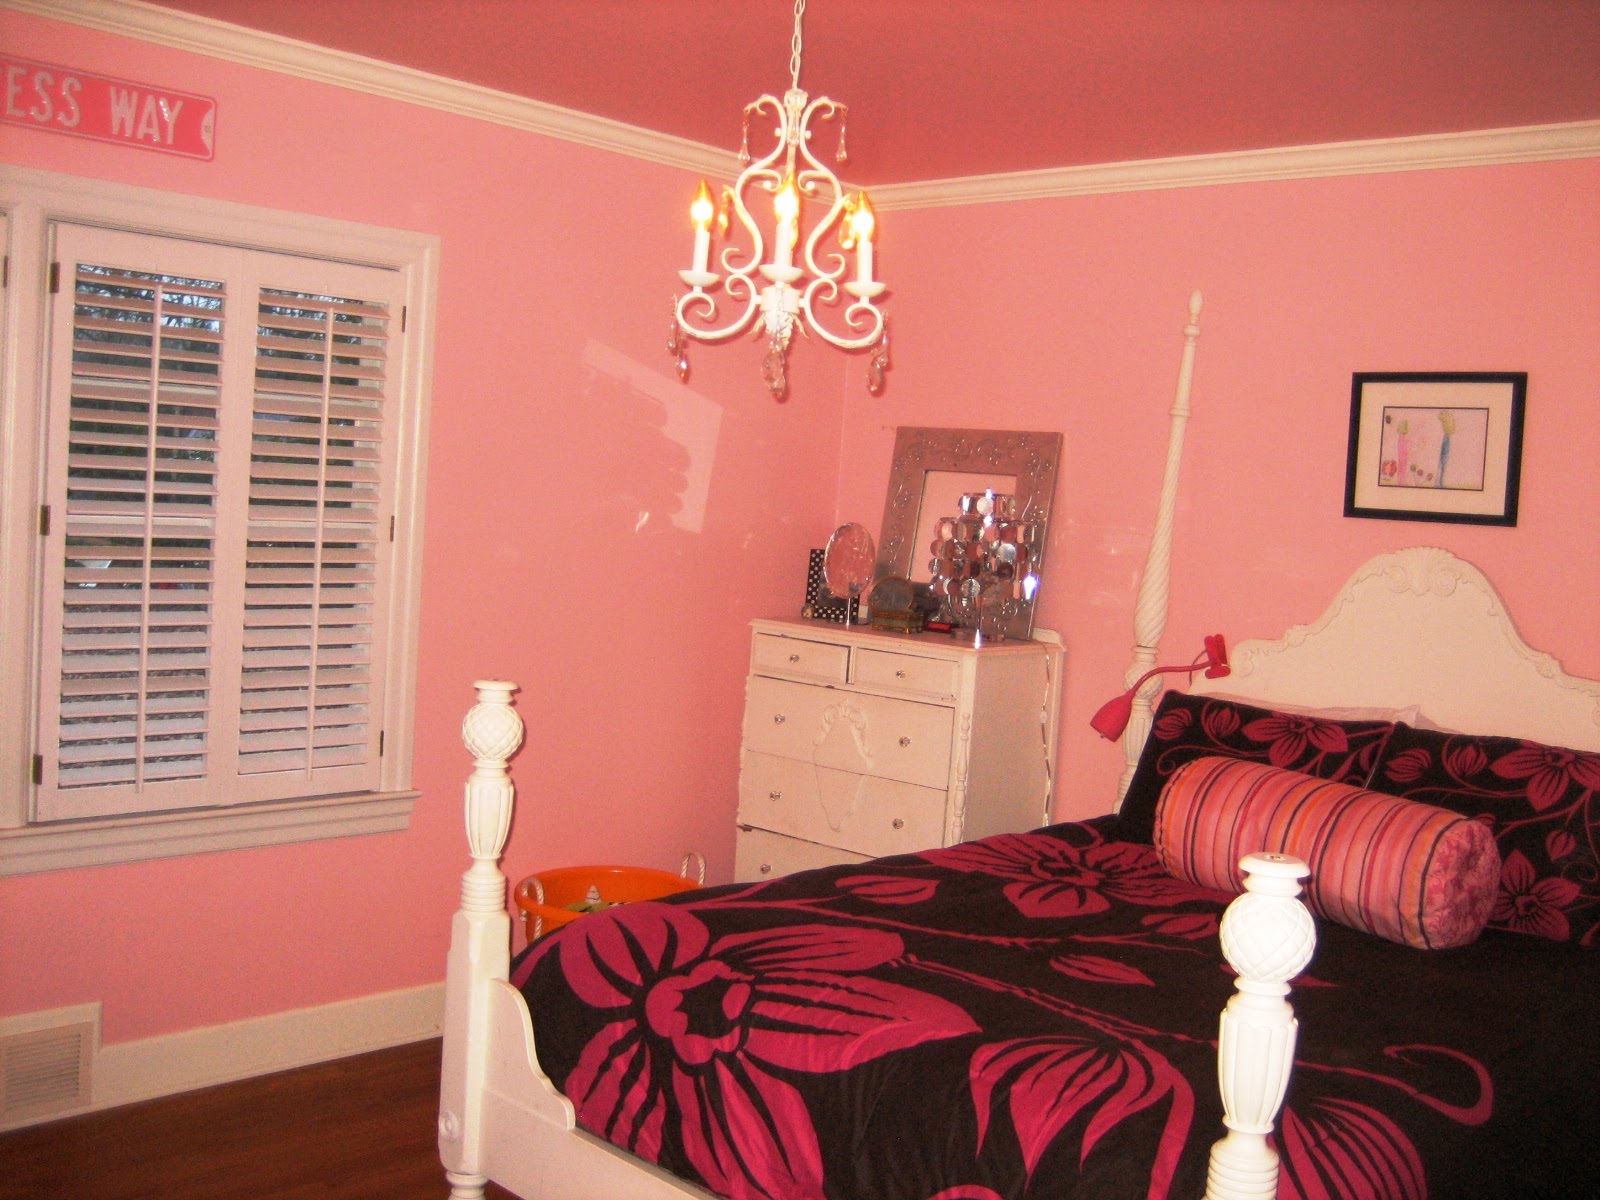  Bedroom  Decorating Ideas  For A 20  Year  Old  Bedroom  